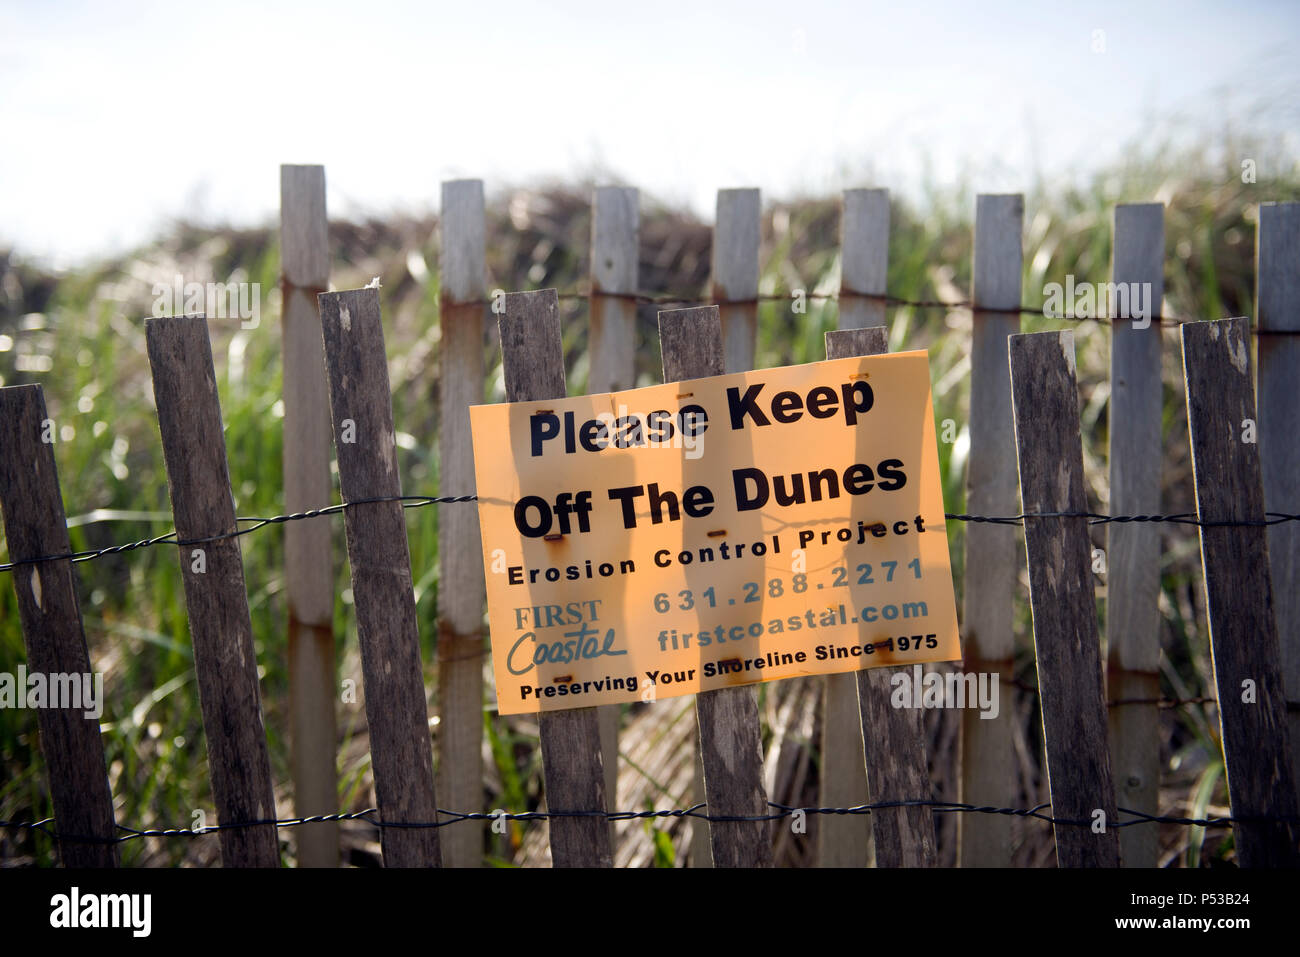 MONTAUK, NEW YORK-JUNE 8: First Coastal erosion control project sign to keep off dunes is seen on beach in Montauk, New York, The Hamptons on June 8,  Stock Photo